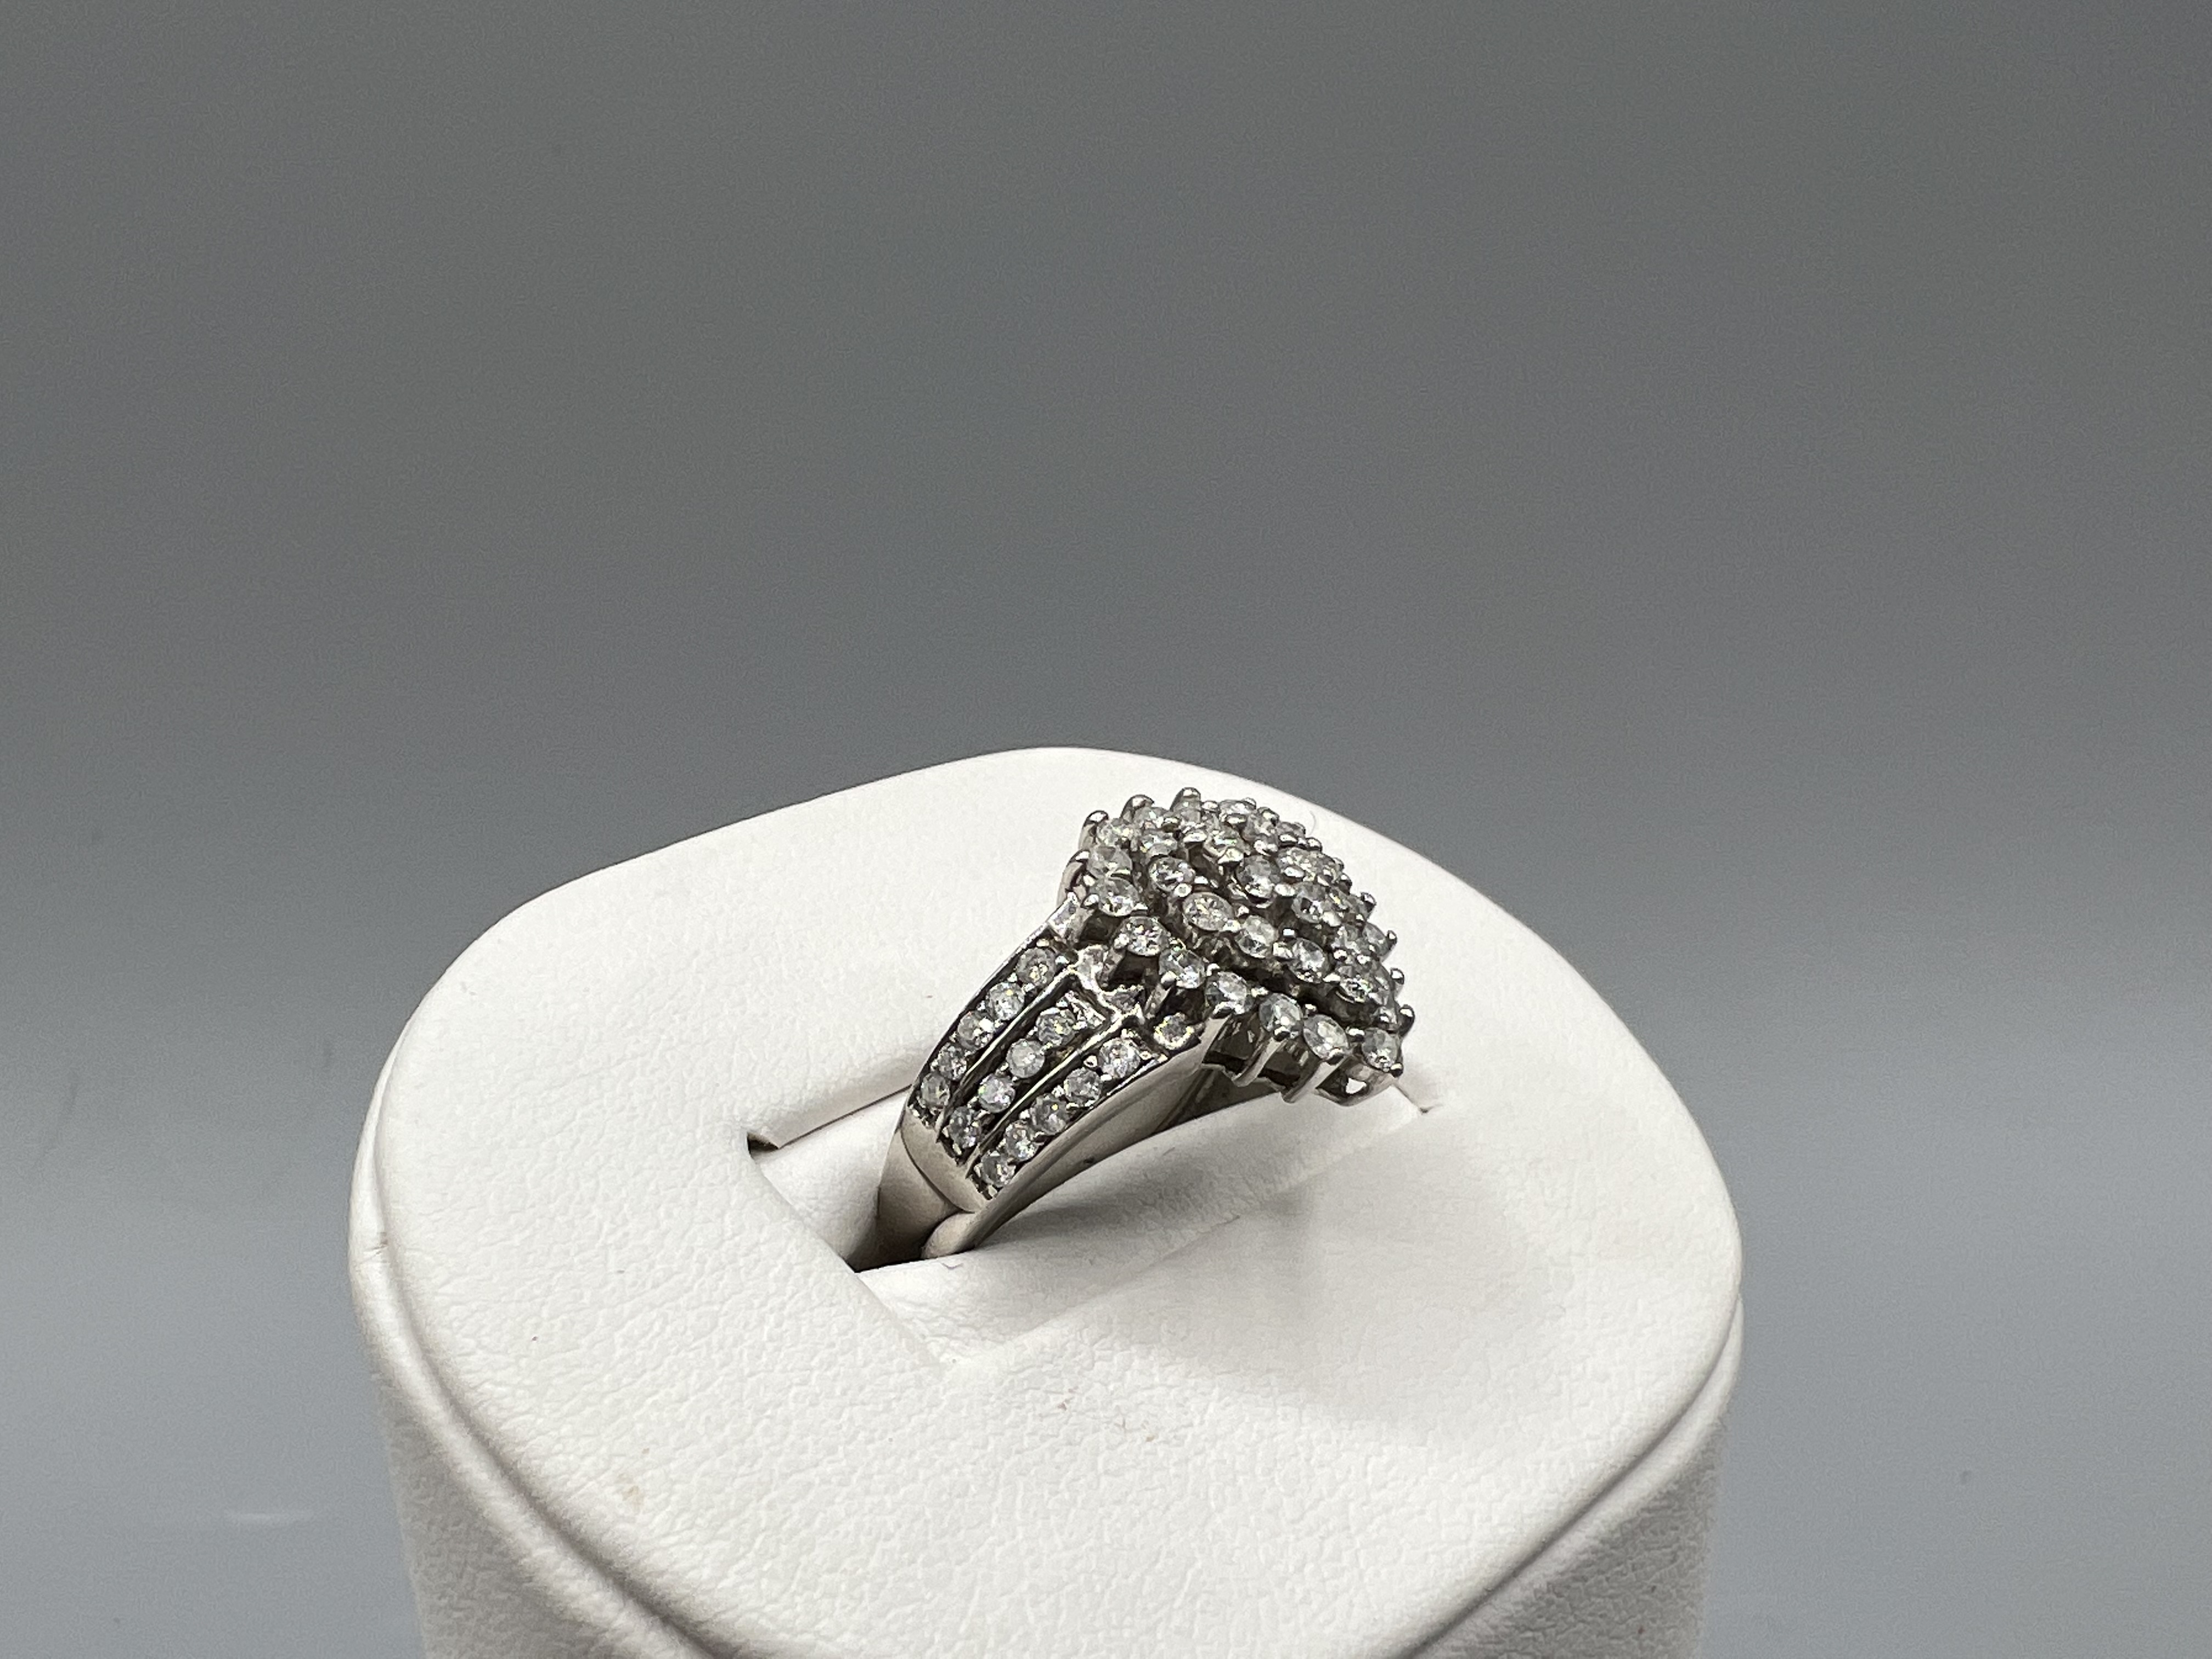 1ct Diamond Pear Shaped Cluster Ring - 4.1g - Image 3 of 3